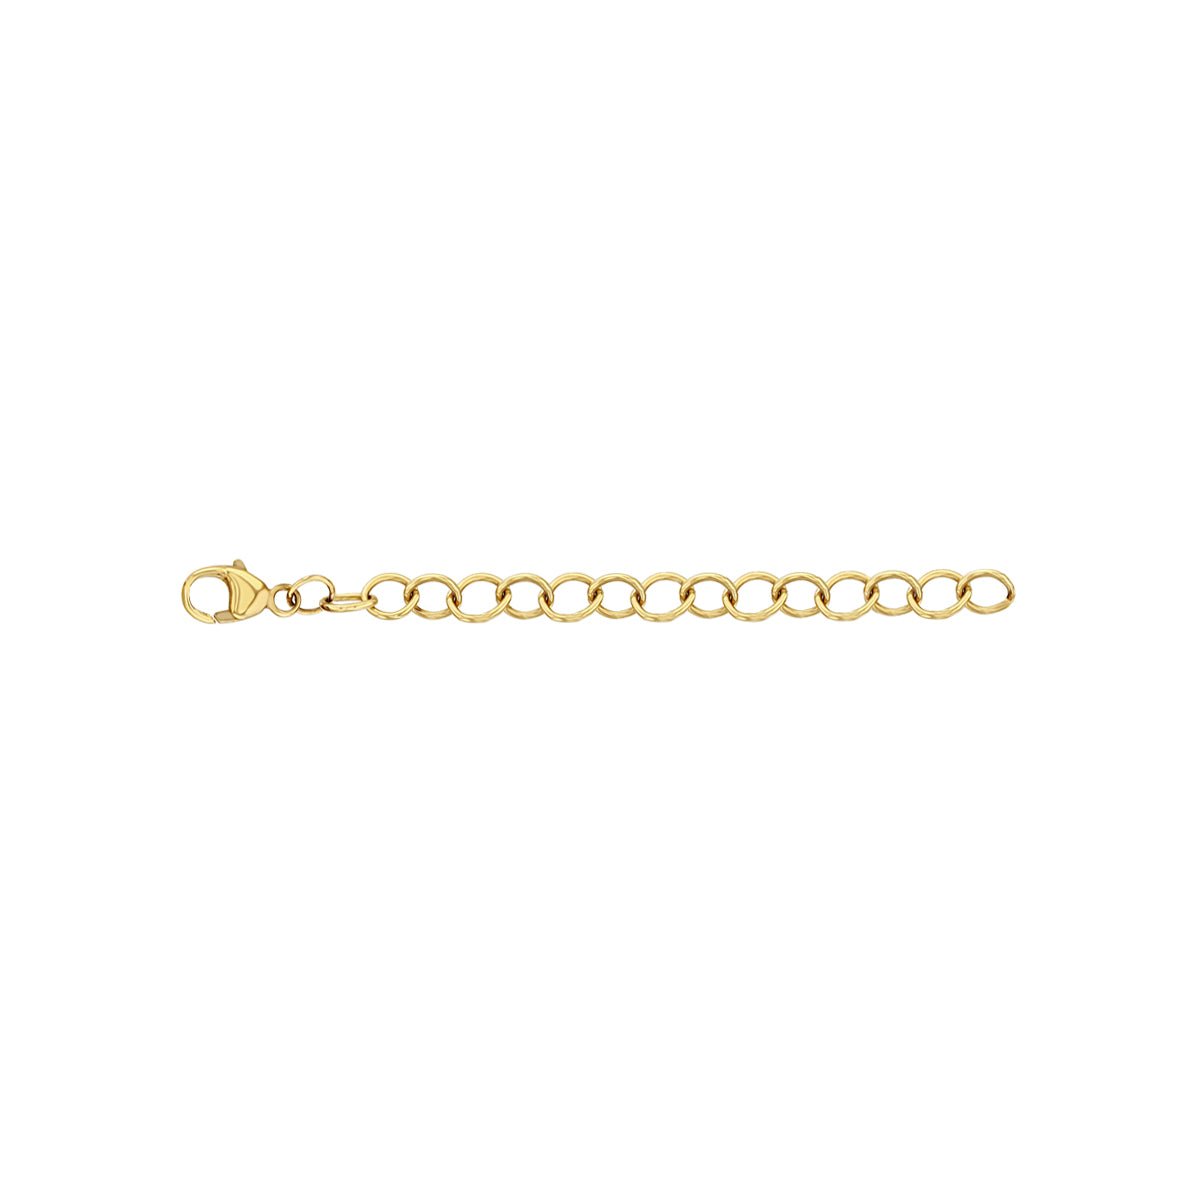 Gold Filled Chain Extender for Necklace Bracelet Supply Component Findings  Extenders w/ Heart Charm + Lobster Clasp, 67mm, CL552